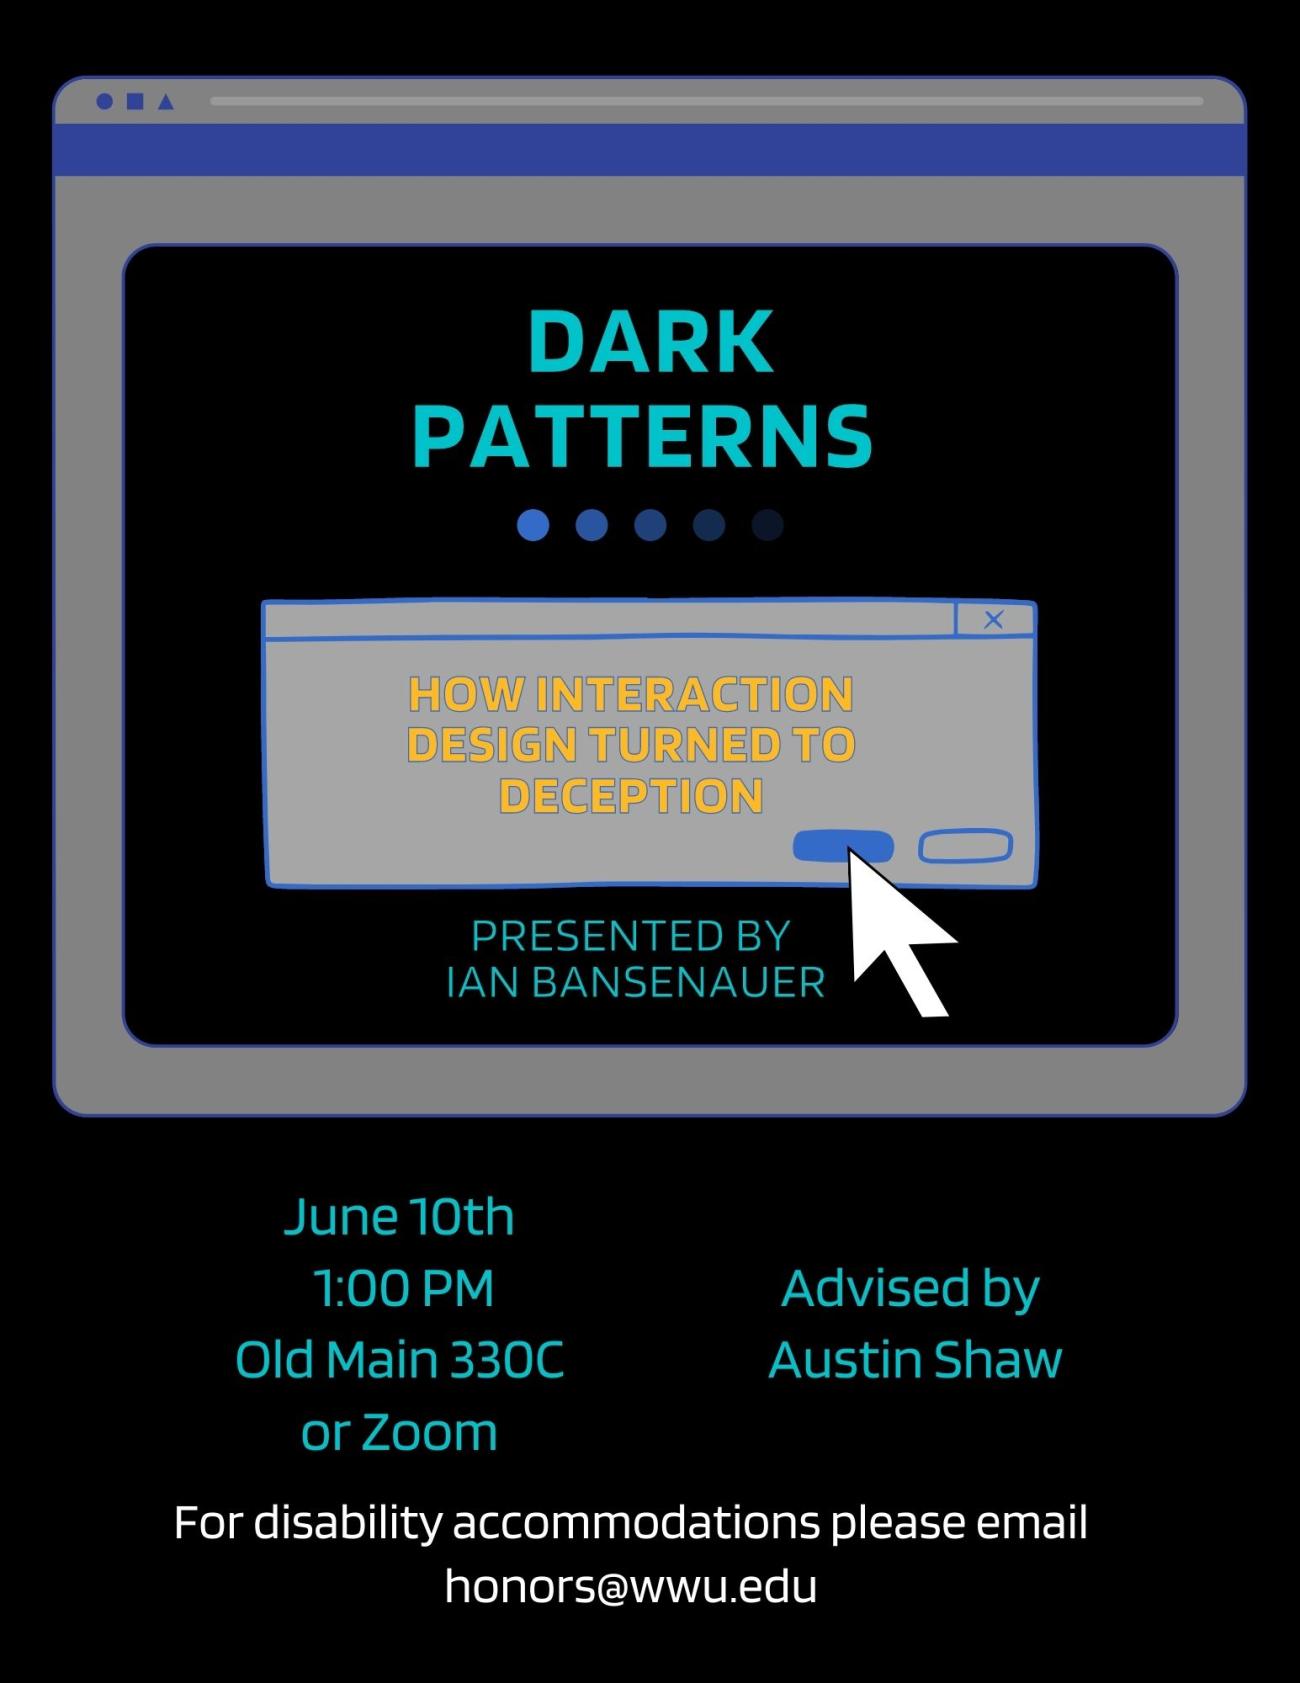 A poster with a black background containing an illustration of a semi-transparent computer window. The text reads: "Dark Patterns: How Interaction Design Turned to Deception. Presented by Ian Bansenauer. June 10th, 1:00 pm, Old Main 330C or Zoom. Advised by Austin Shaw. For disability accommodations, please email honors@wwu.edu."